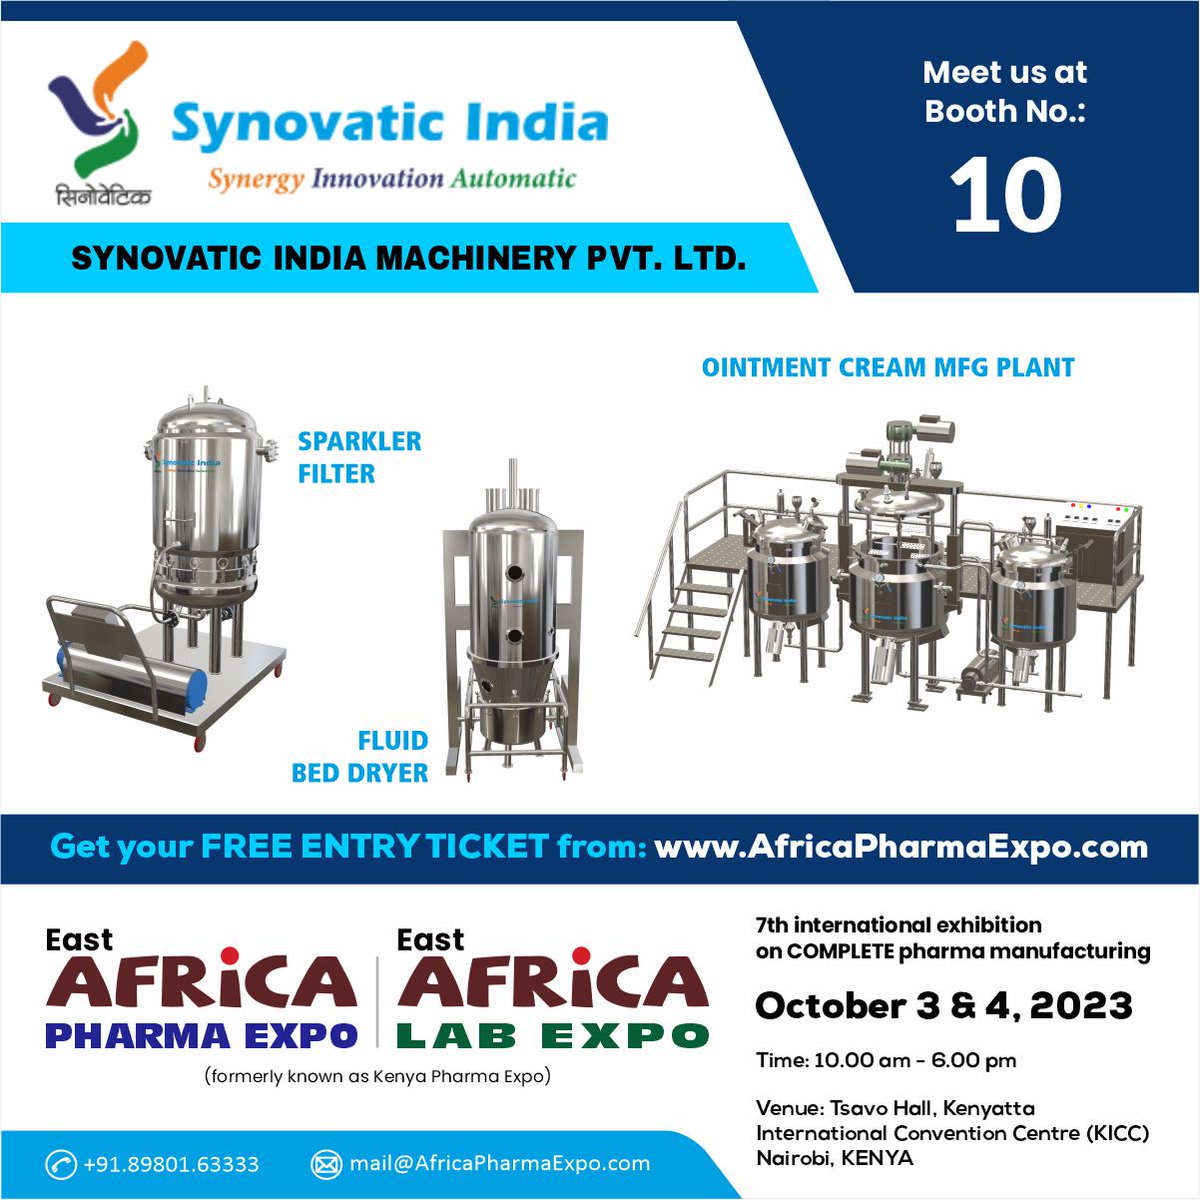 Meet Us @ Synovatic India Machinery Pvt. Ltd.

AFRICA PHARMA EXPO 2023
October 3 & 4, 2023 Nairobi KENYA

For more information and Booth Booking
E: mail@AfricaPharmaExpo.com 
africapharmaexpo.com

#EastAfricaPharmaExpo2023 #EastAfricaLabExpo2023 #AfricaPharmaExpo